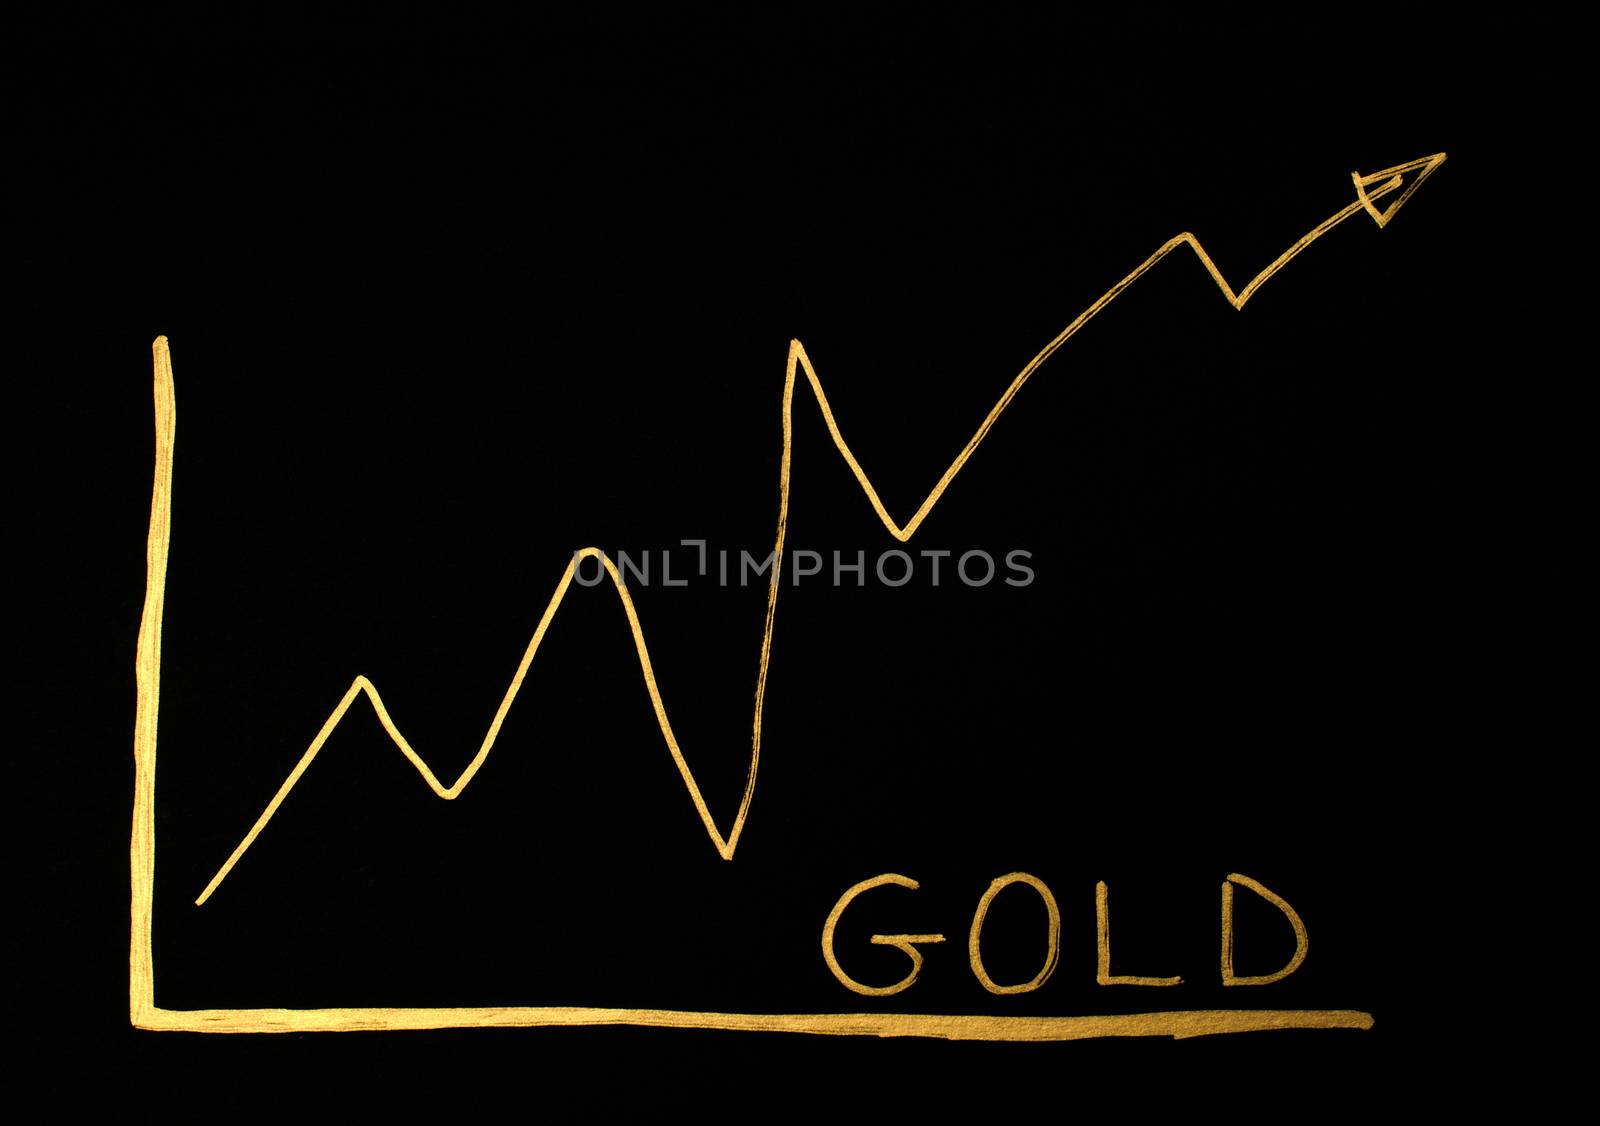 Gold trend exchange conception